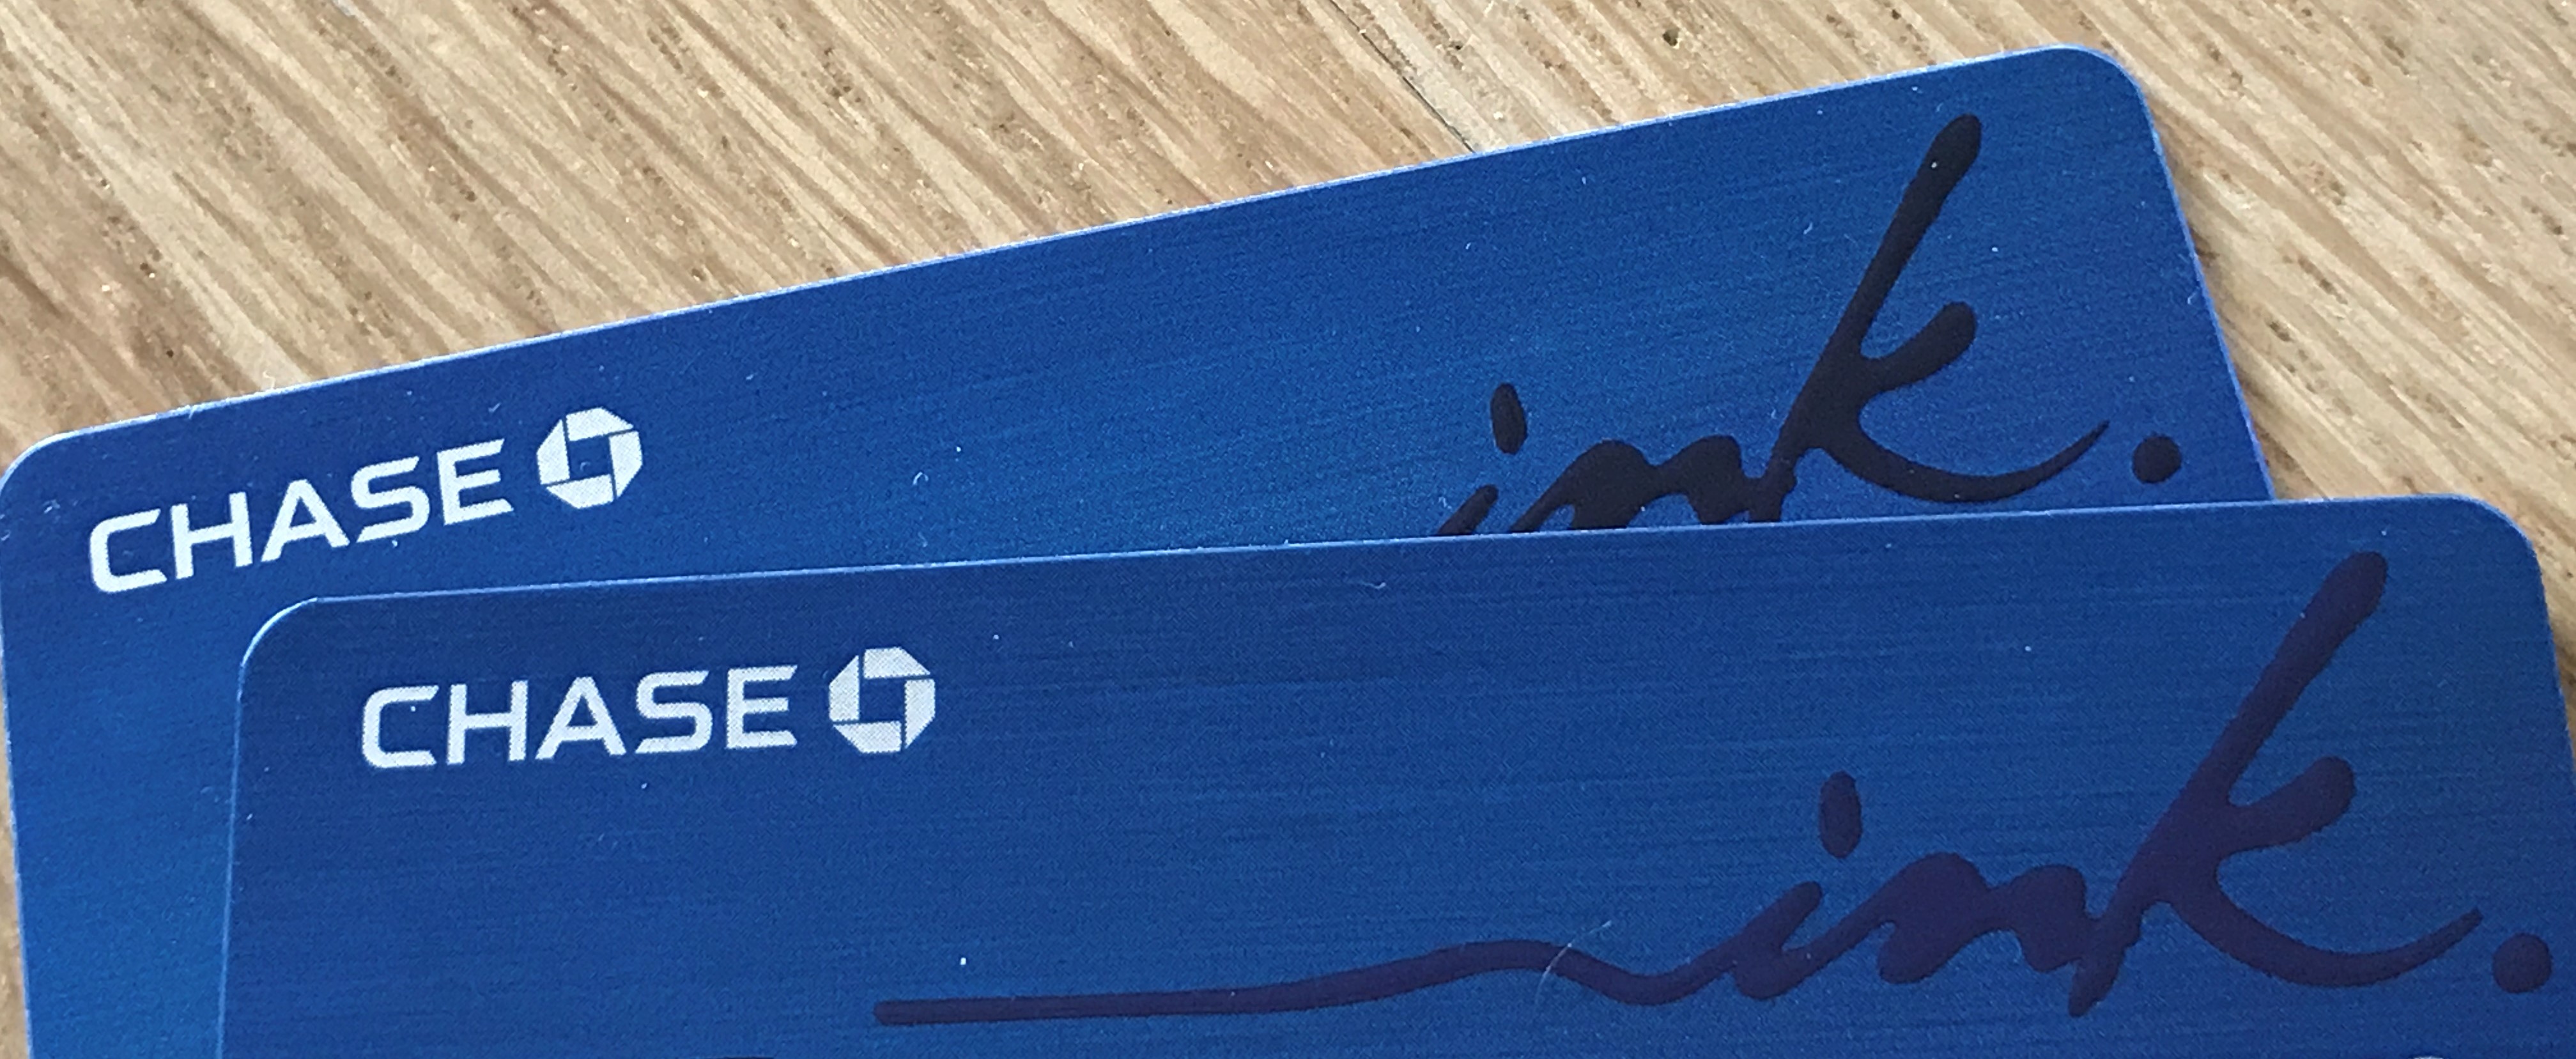 a blue rectangular object with writing on it